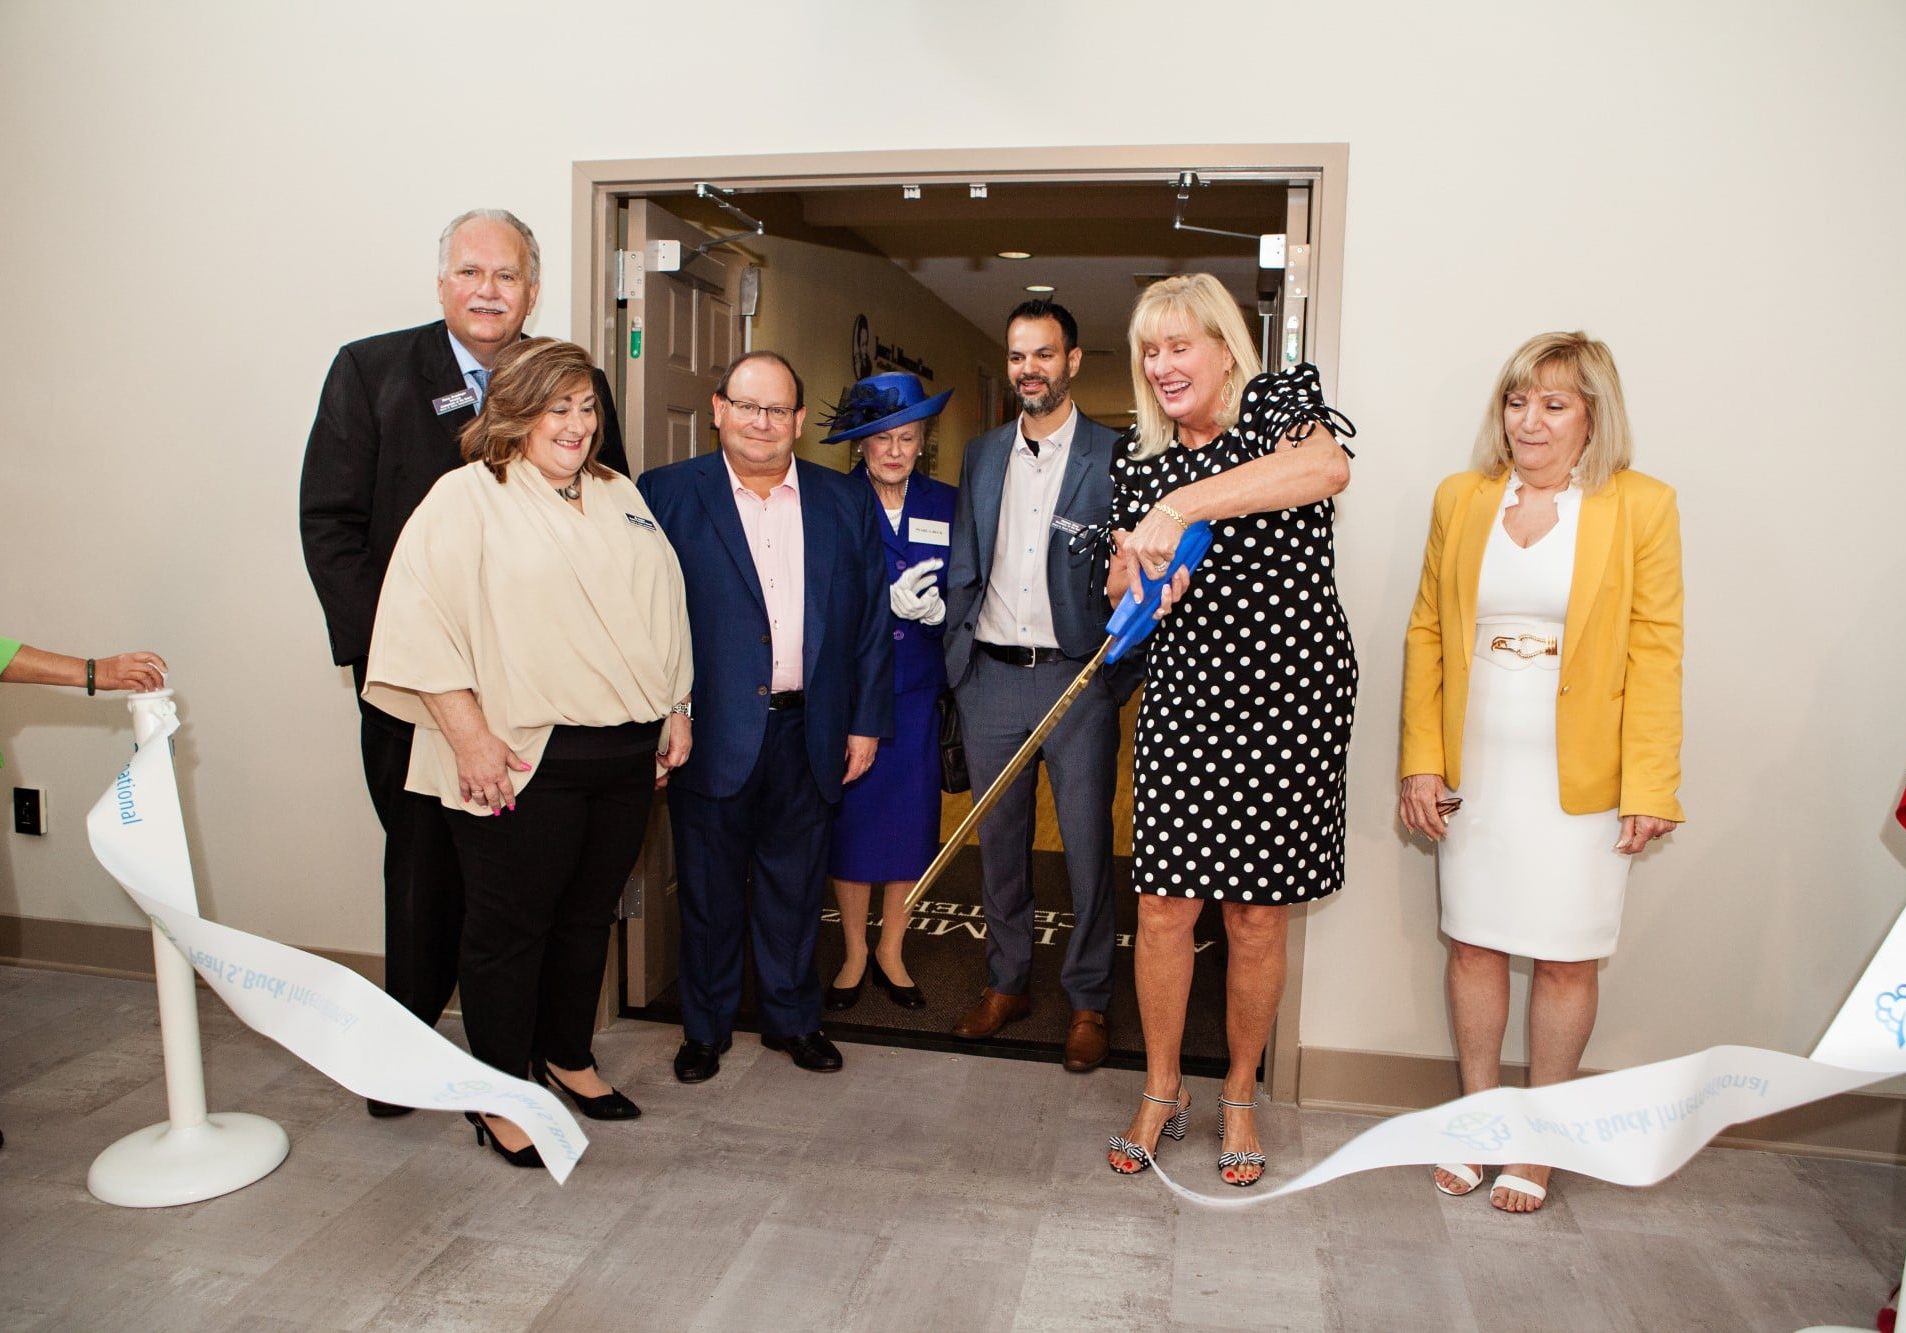 Pearl S. Buck International leadership and board members cut the ribbon at the grand opening of the Janet L. Mintzer Center